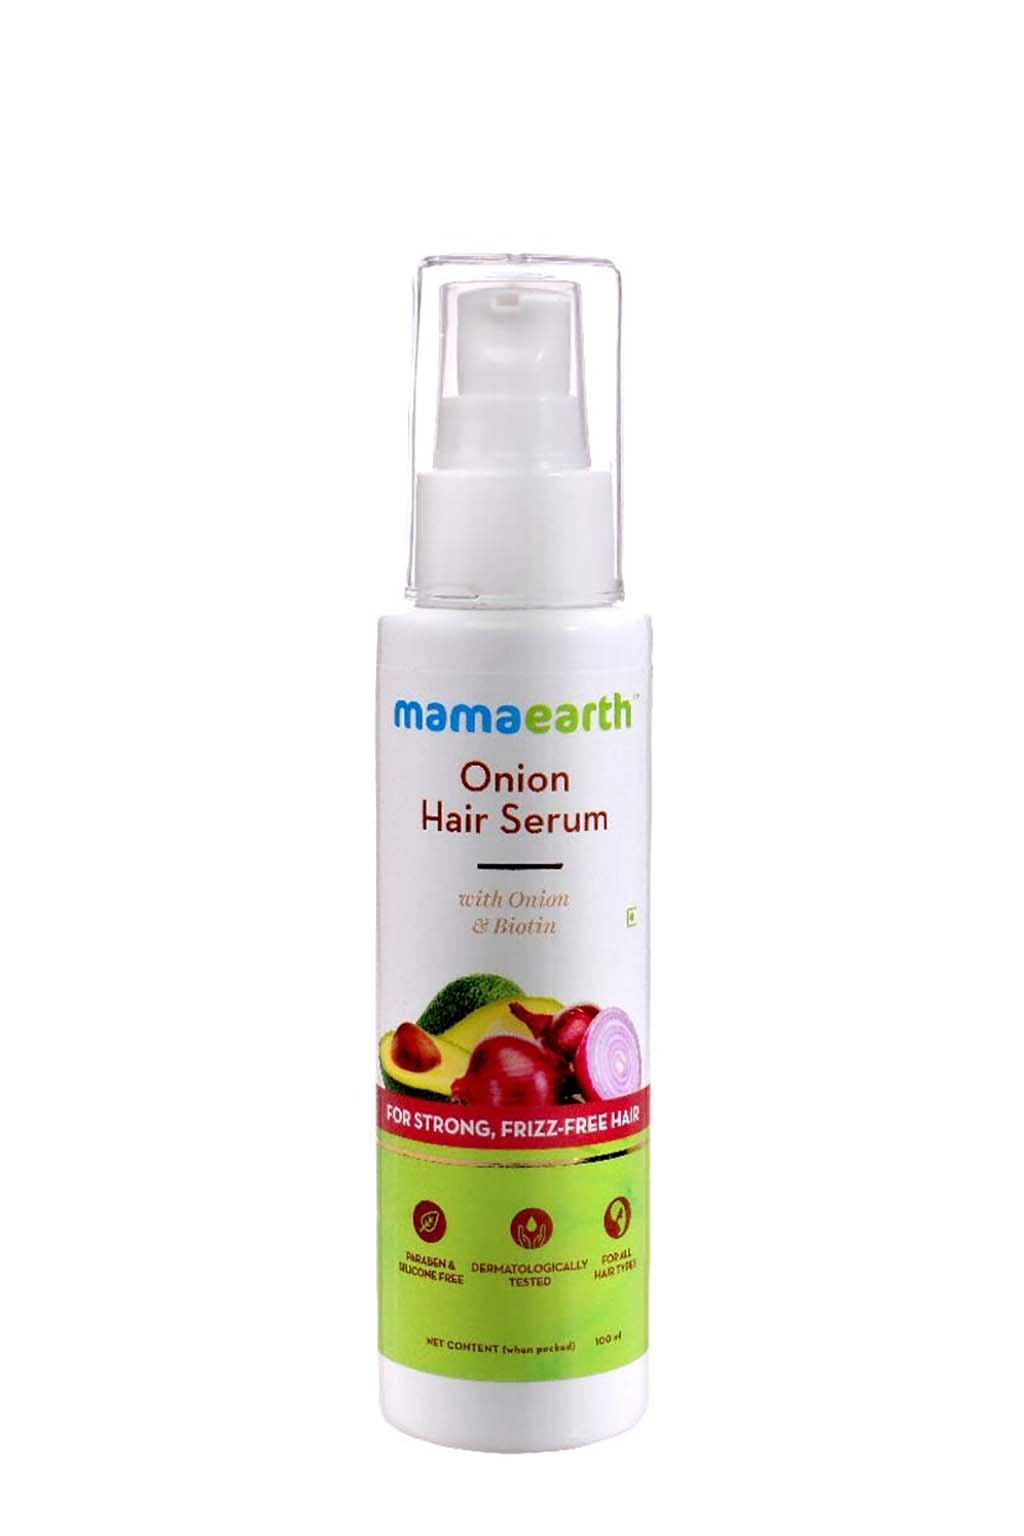 MamaEarth Onion Hair Serum with Onion & Biotin for Strong Frizz Free Hair (100 ml) MamaEarth